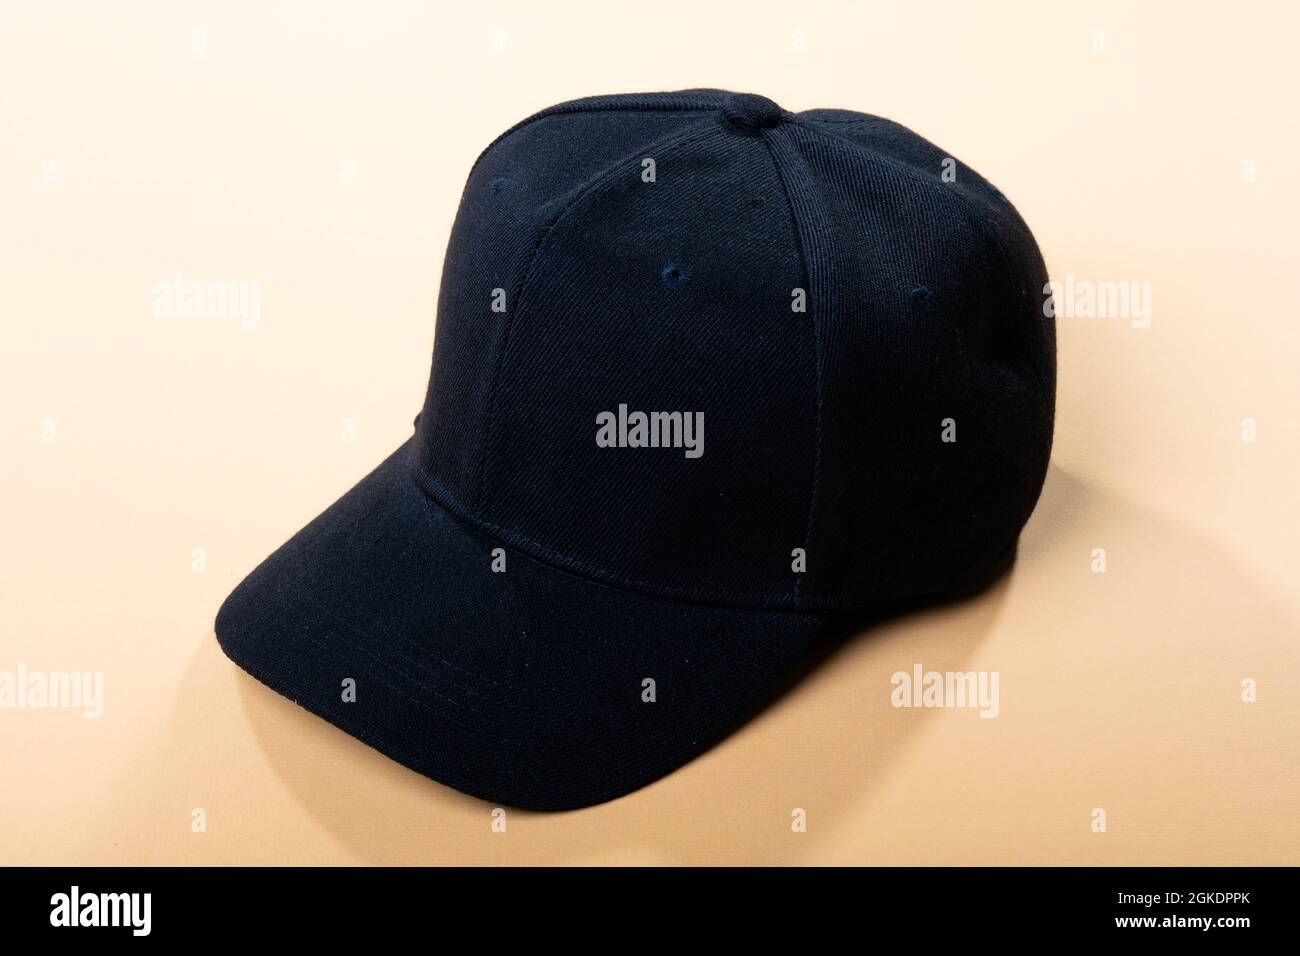 Composition of traditional peaked black baseball cap on pale brown background Stock Photo